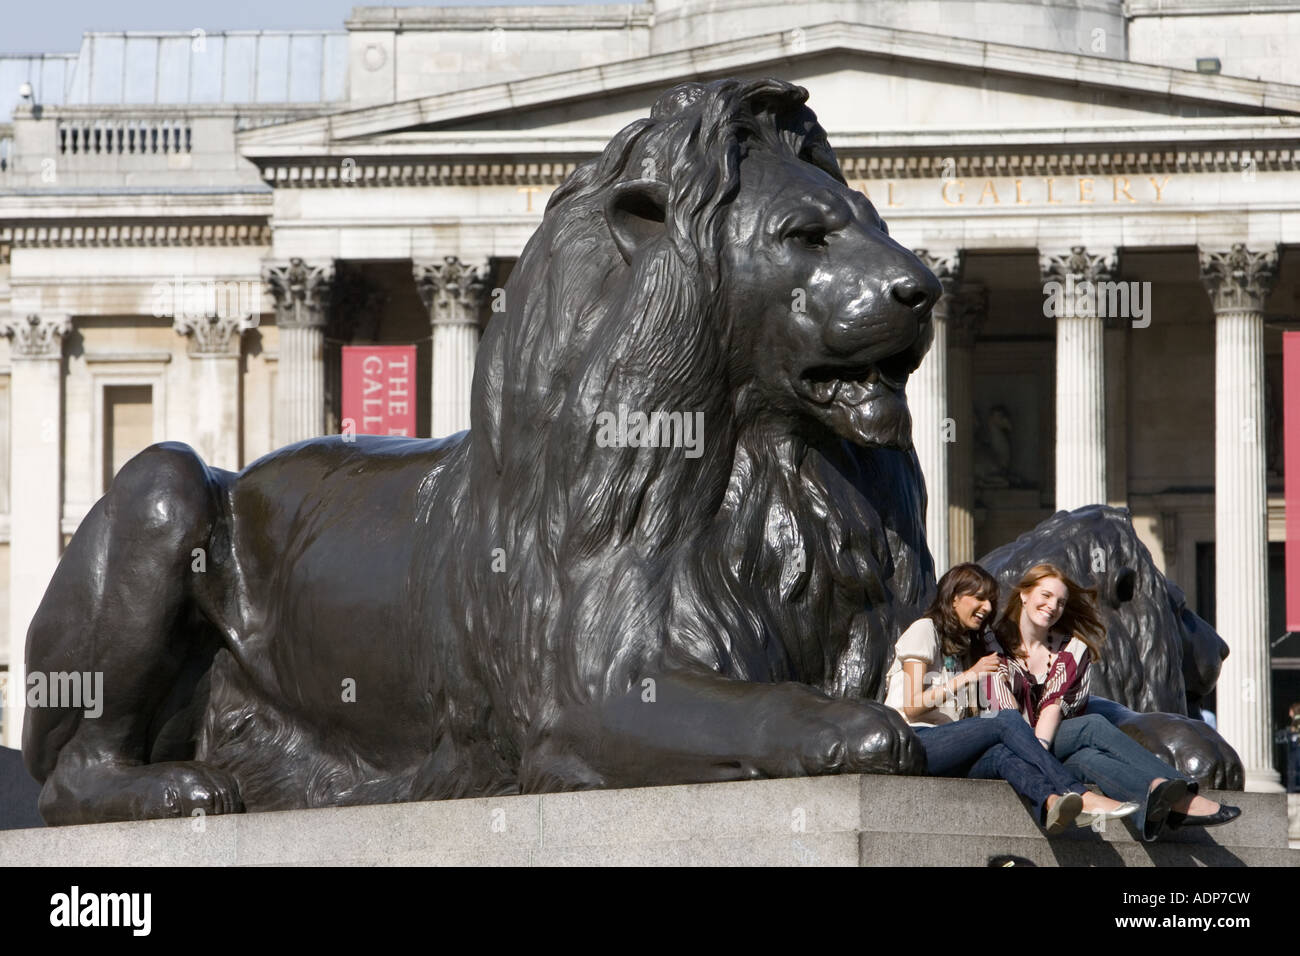 Tourists sit on lion statues in front of National Gallery in Trafalgar Square London United Kingdom Stock Photo